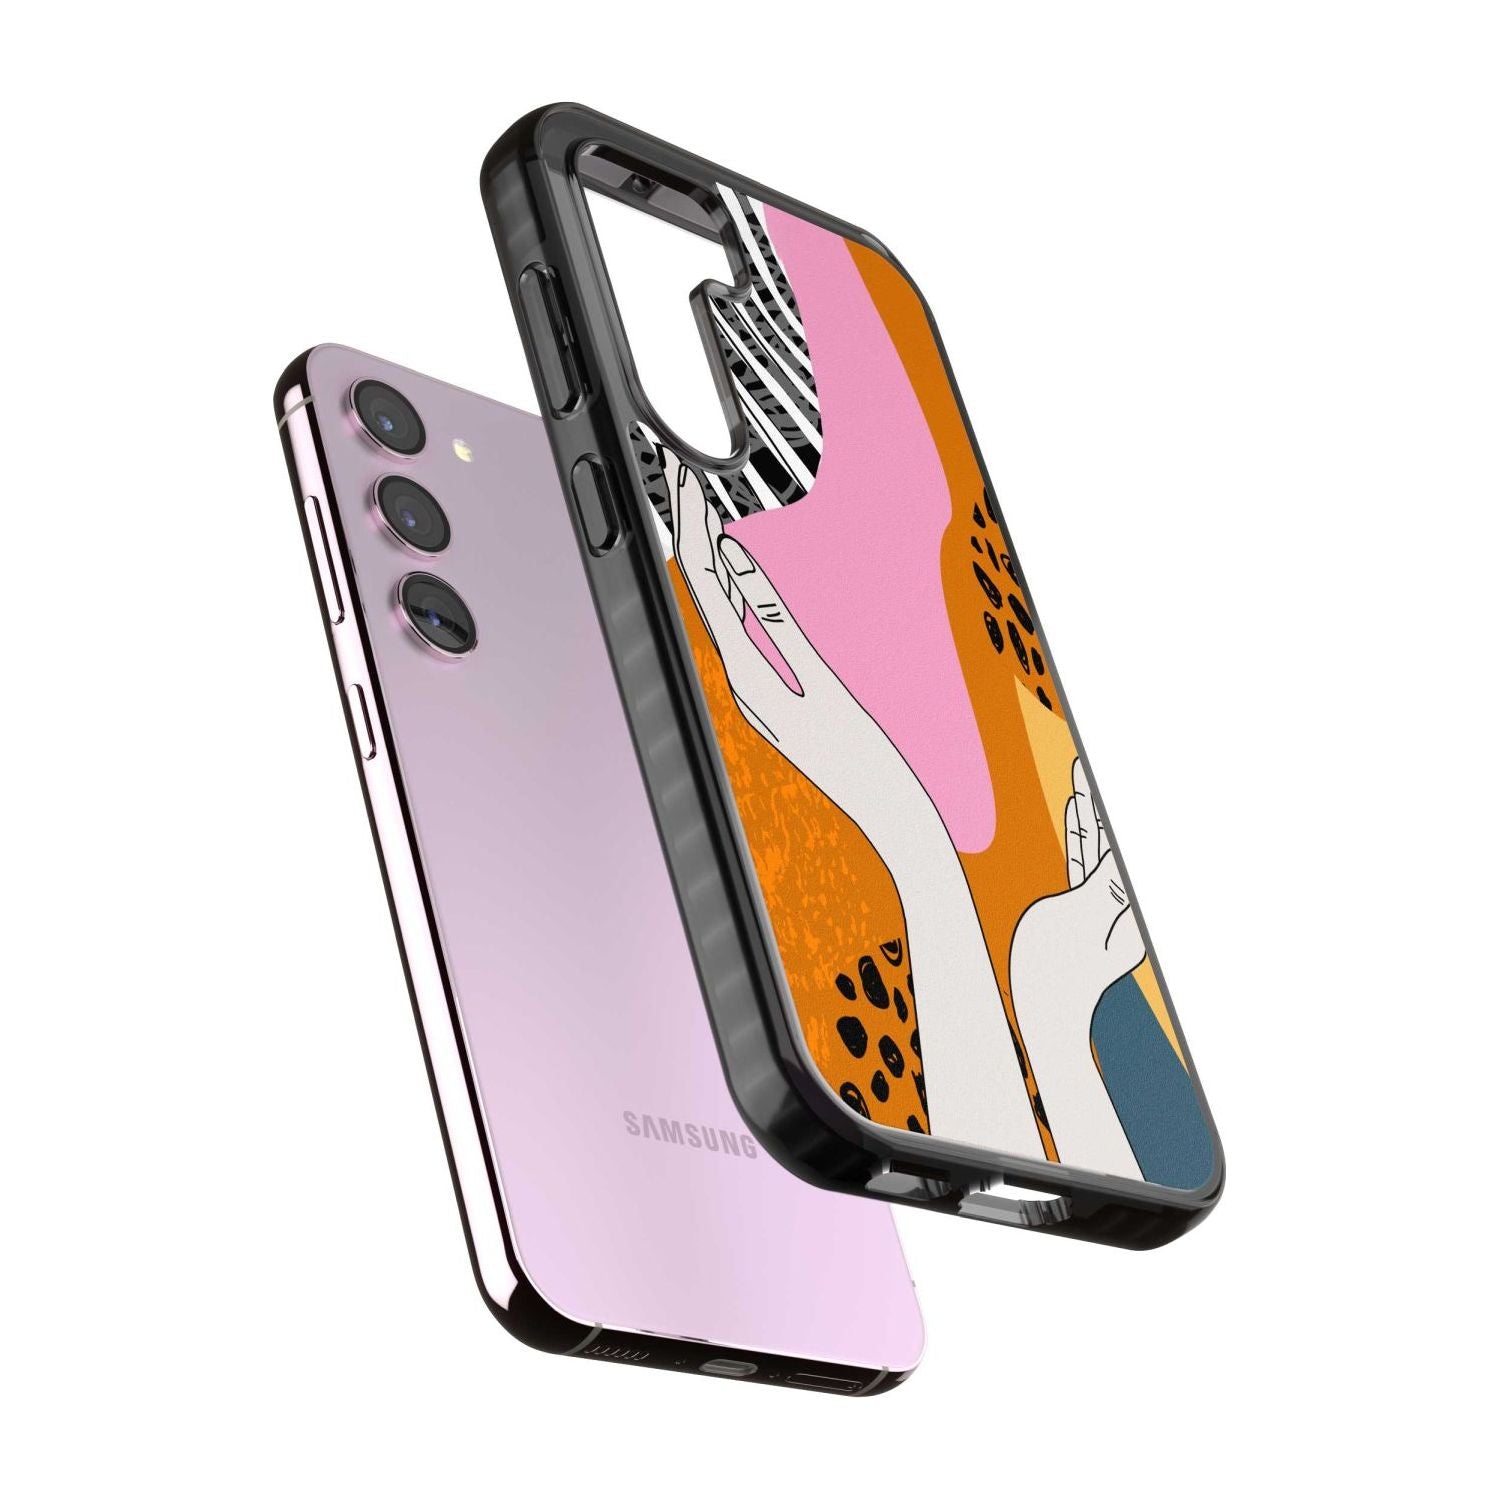 Catching Feels Phone Case iPhone 15 Pro Max / Black Impact Case,iPhone 15 Plus / Black Impact Case,iPhone 15 Pro / Black Impact Case,iPhone 15 / Black Impact Case,iPhone 15 Pro Max / Impact Case,iPhone 15 Plus / Impact Case,iPhone 15 Pro / Impact Case,iPhone 15 / Impact Case,iPhone 15 Pro Max / Magsafe Black Impact Case,iPhone 15 Plus / Magsafe Black Impact Case,iPhone 15 Pro / Magsafe Black Impact Case,iPhone 15 / Magsafe Black Impact Case,iPhone 14 Pro Max / Black Impact Case,iPhone 14 Plus / Black Impact